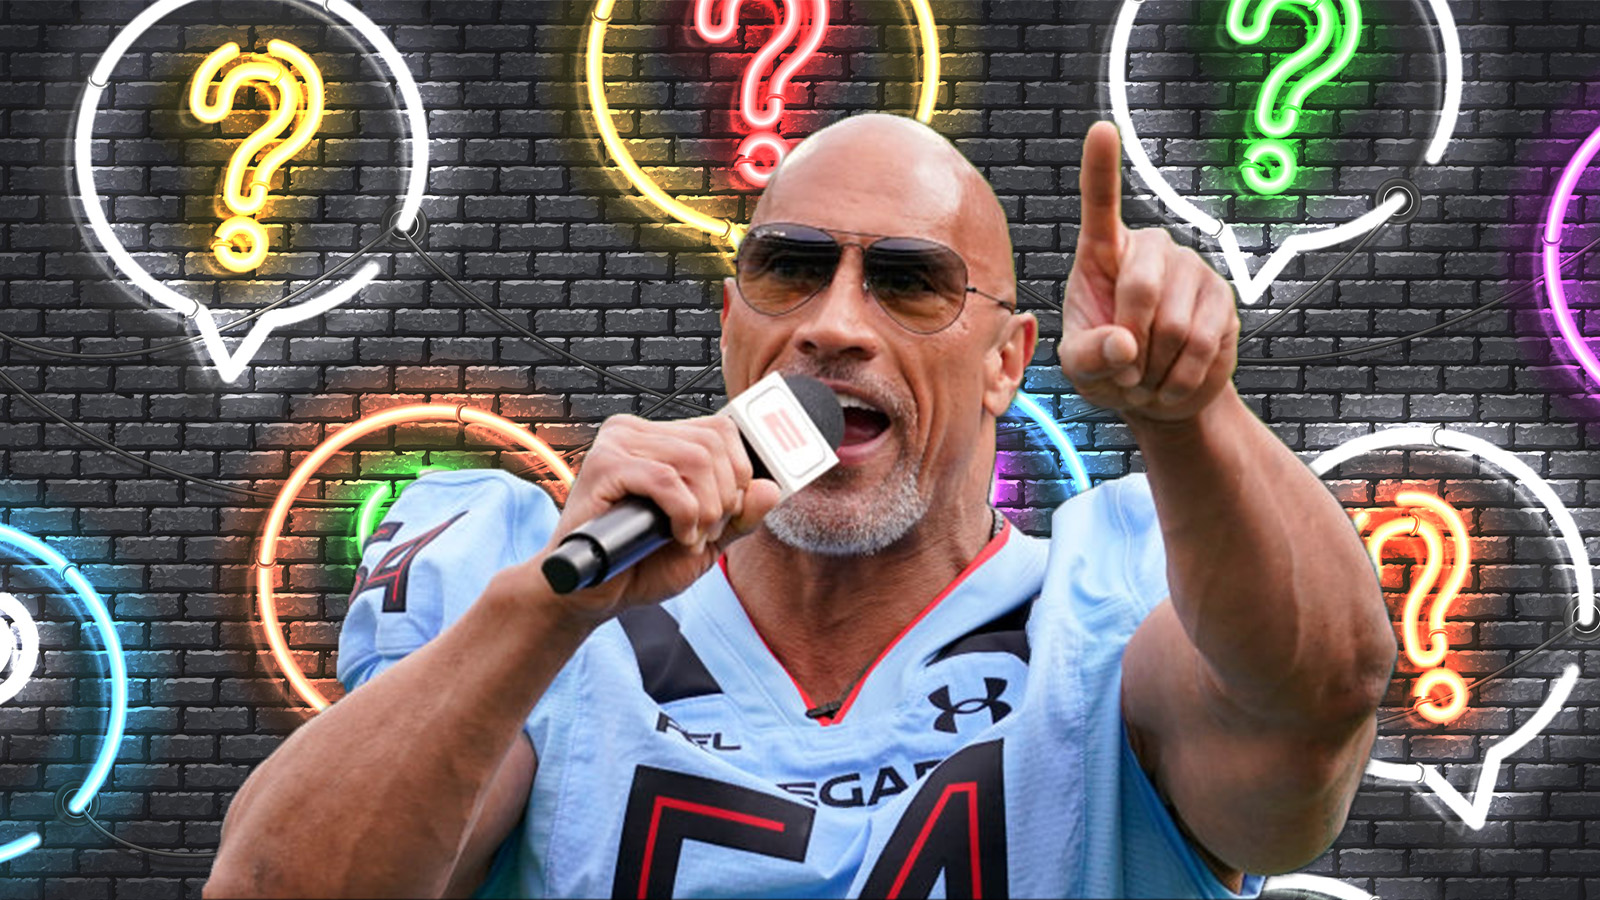 Can Spring Football Survive After Dwayne 'The Rock' Johnson' USFL/XFL Merger?